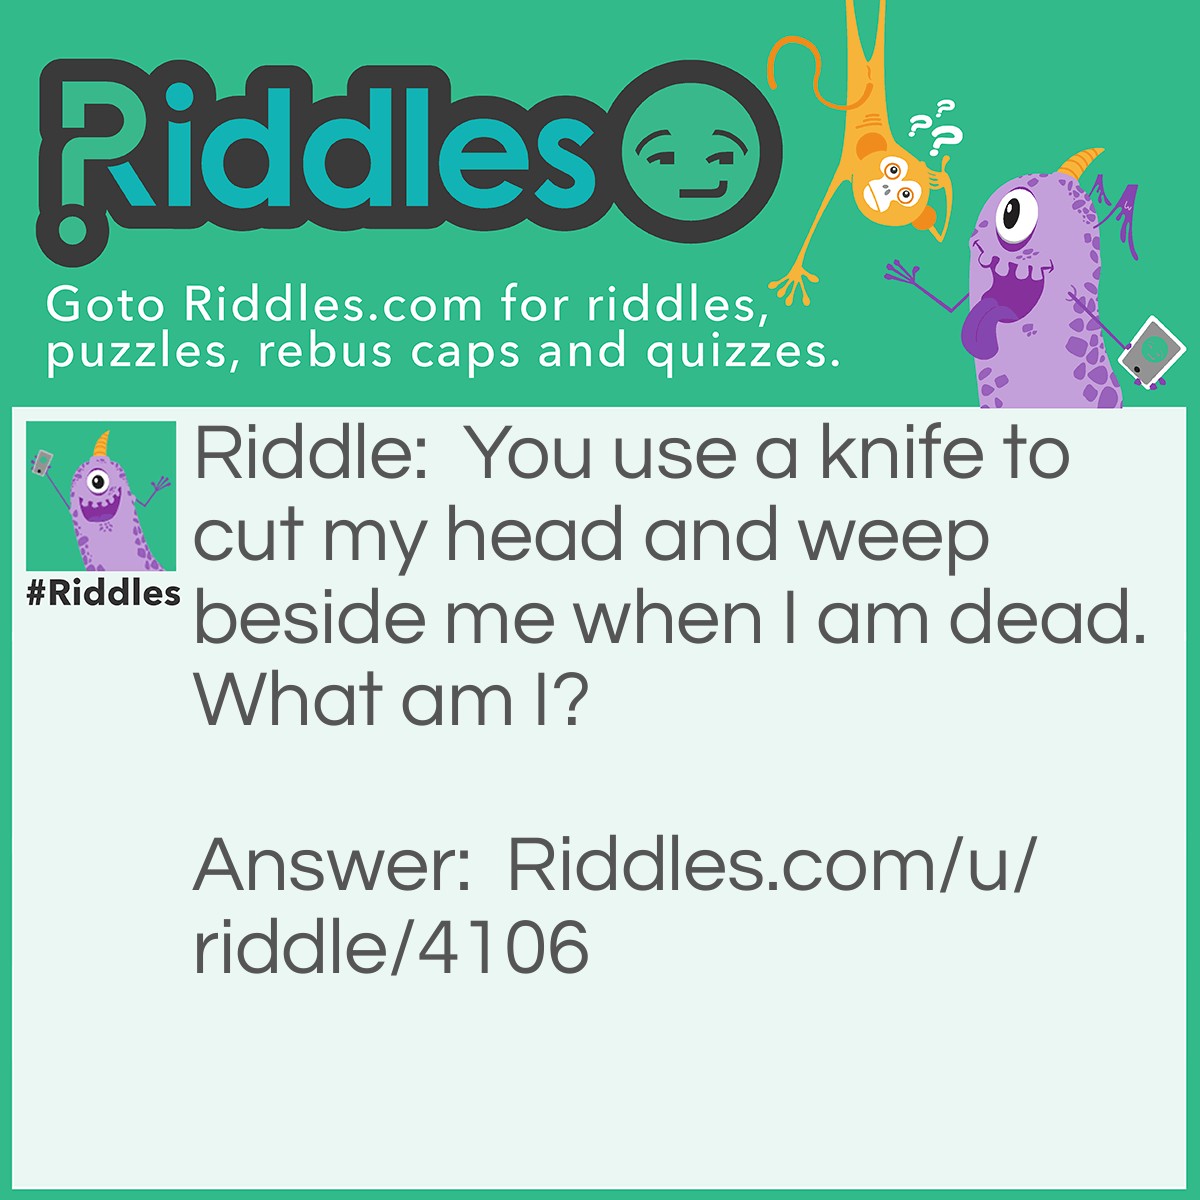 Riddle: You use a knife to cut my head and weep beside me when I am dead. What am I? Answer: An onion